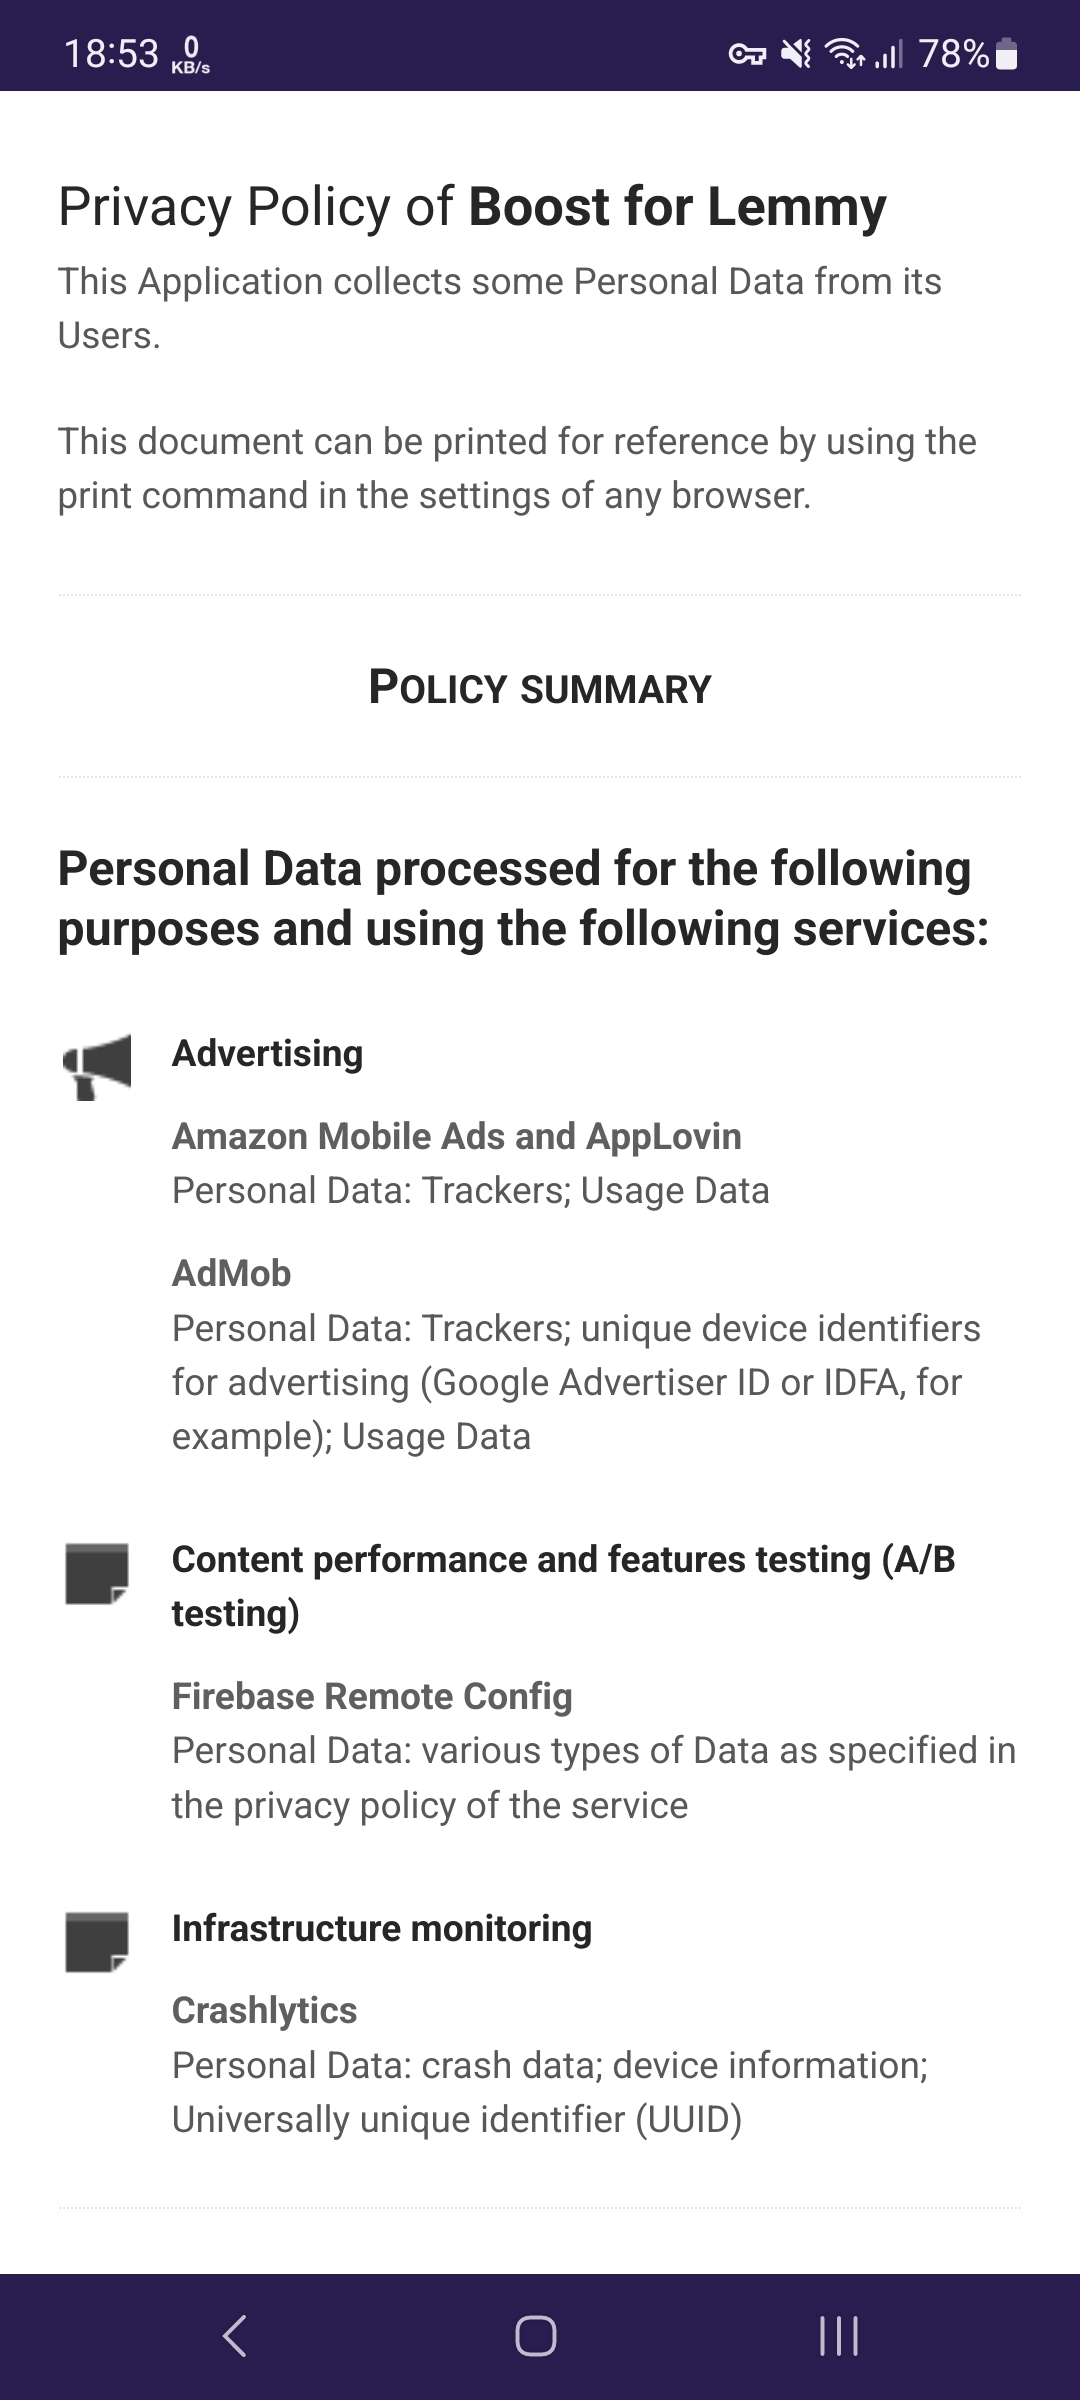 privacy policy for boost, Amazon ad trackers and google